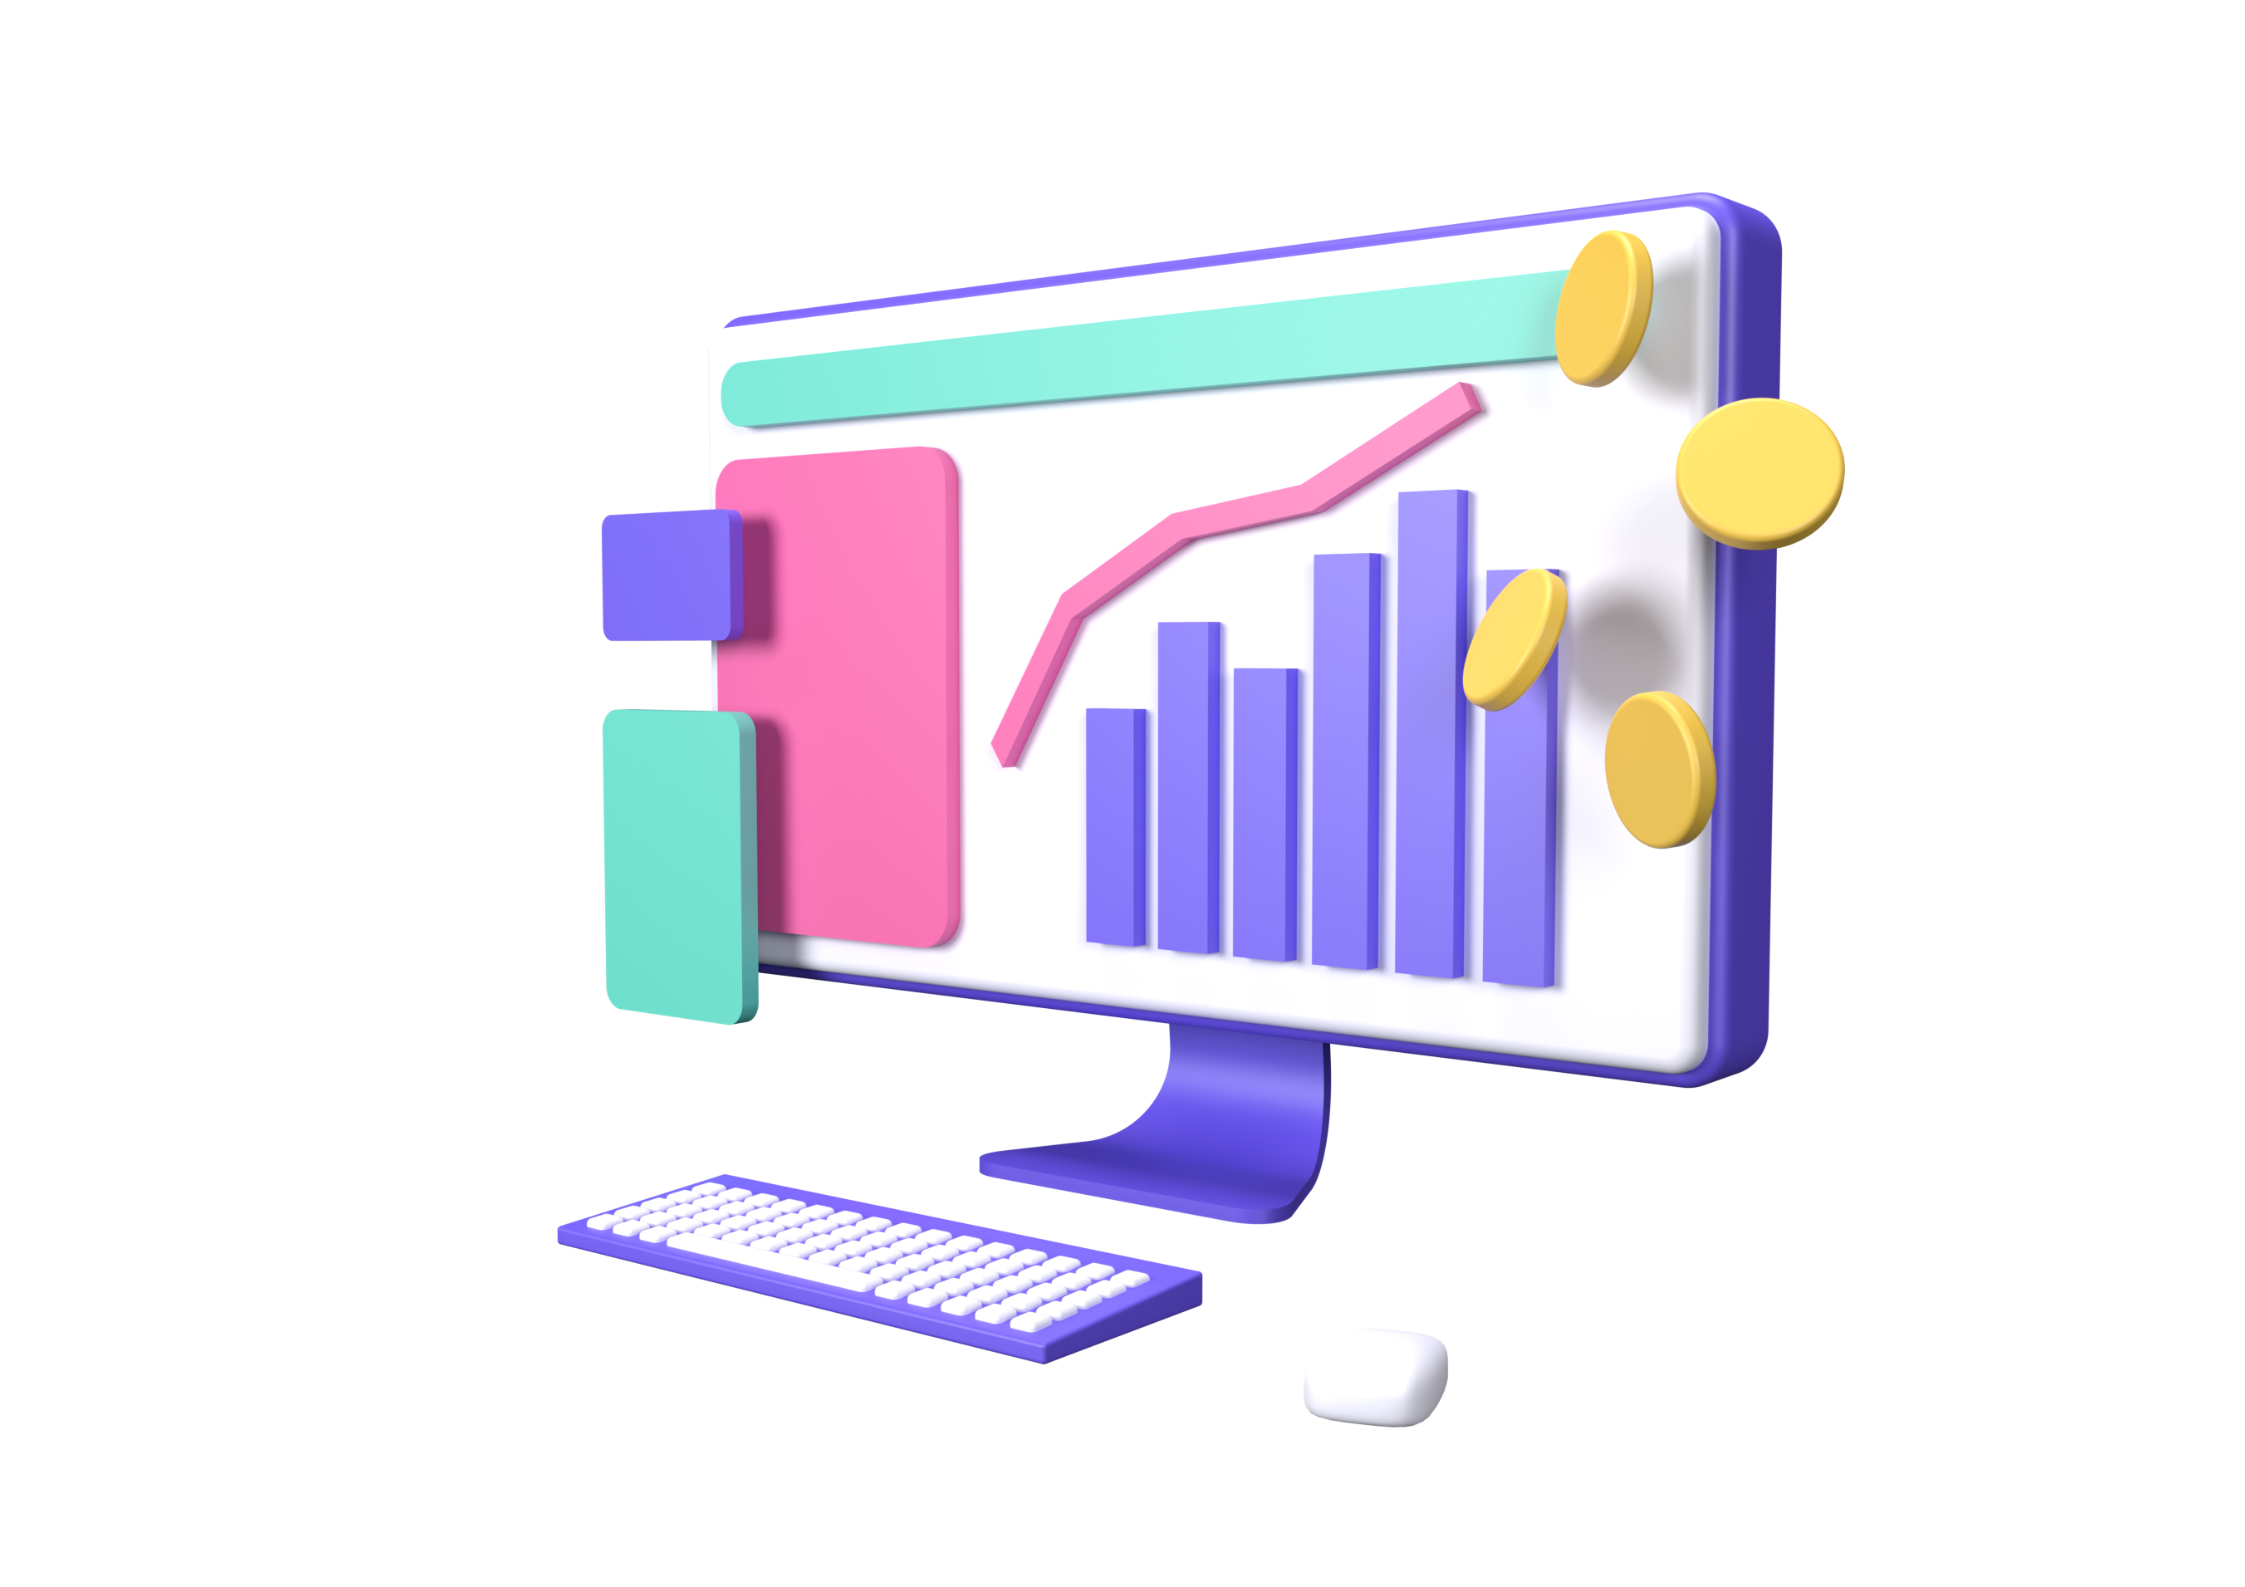 Key business metrics to track for your web hosting subscription business